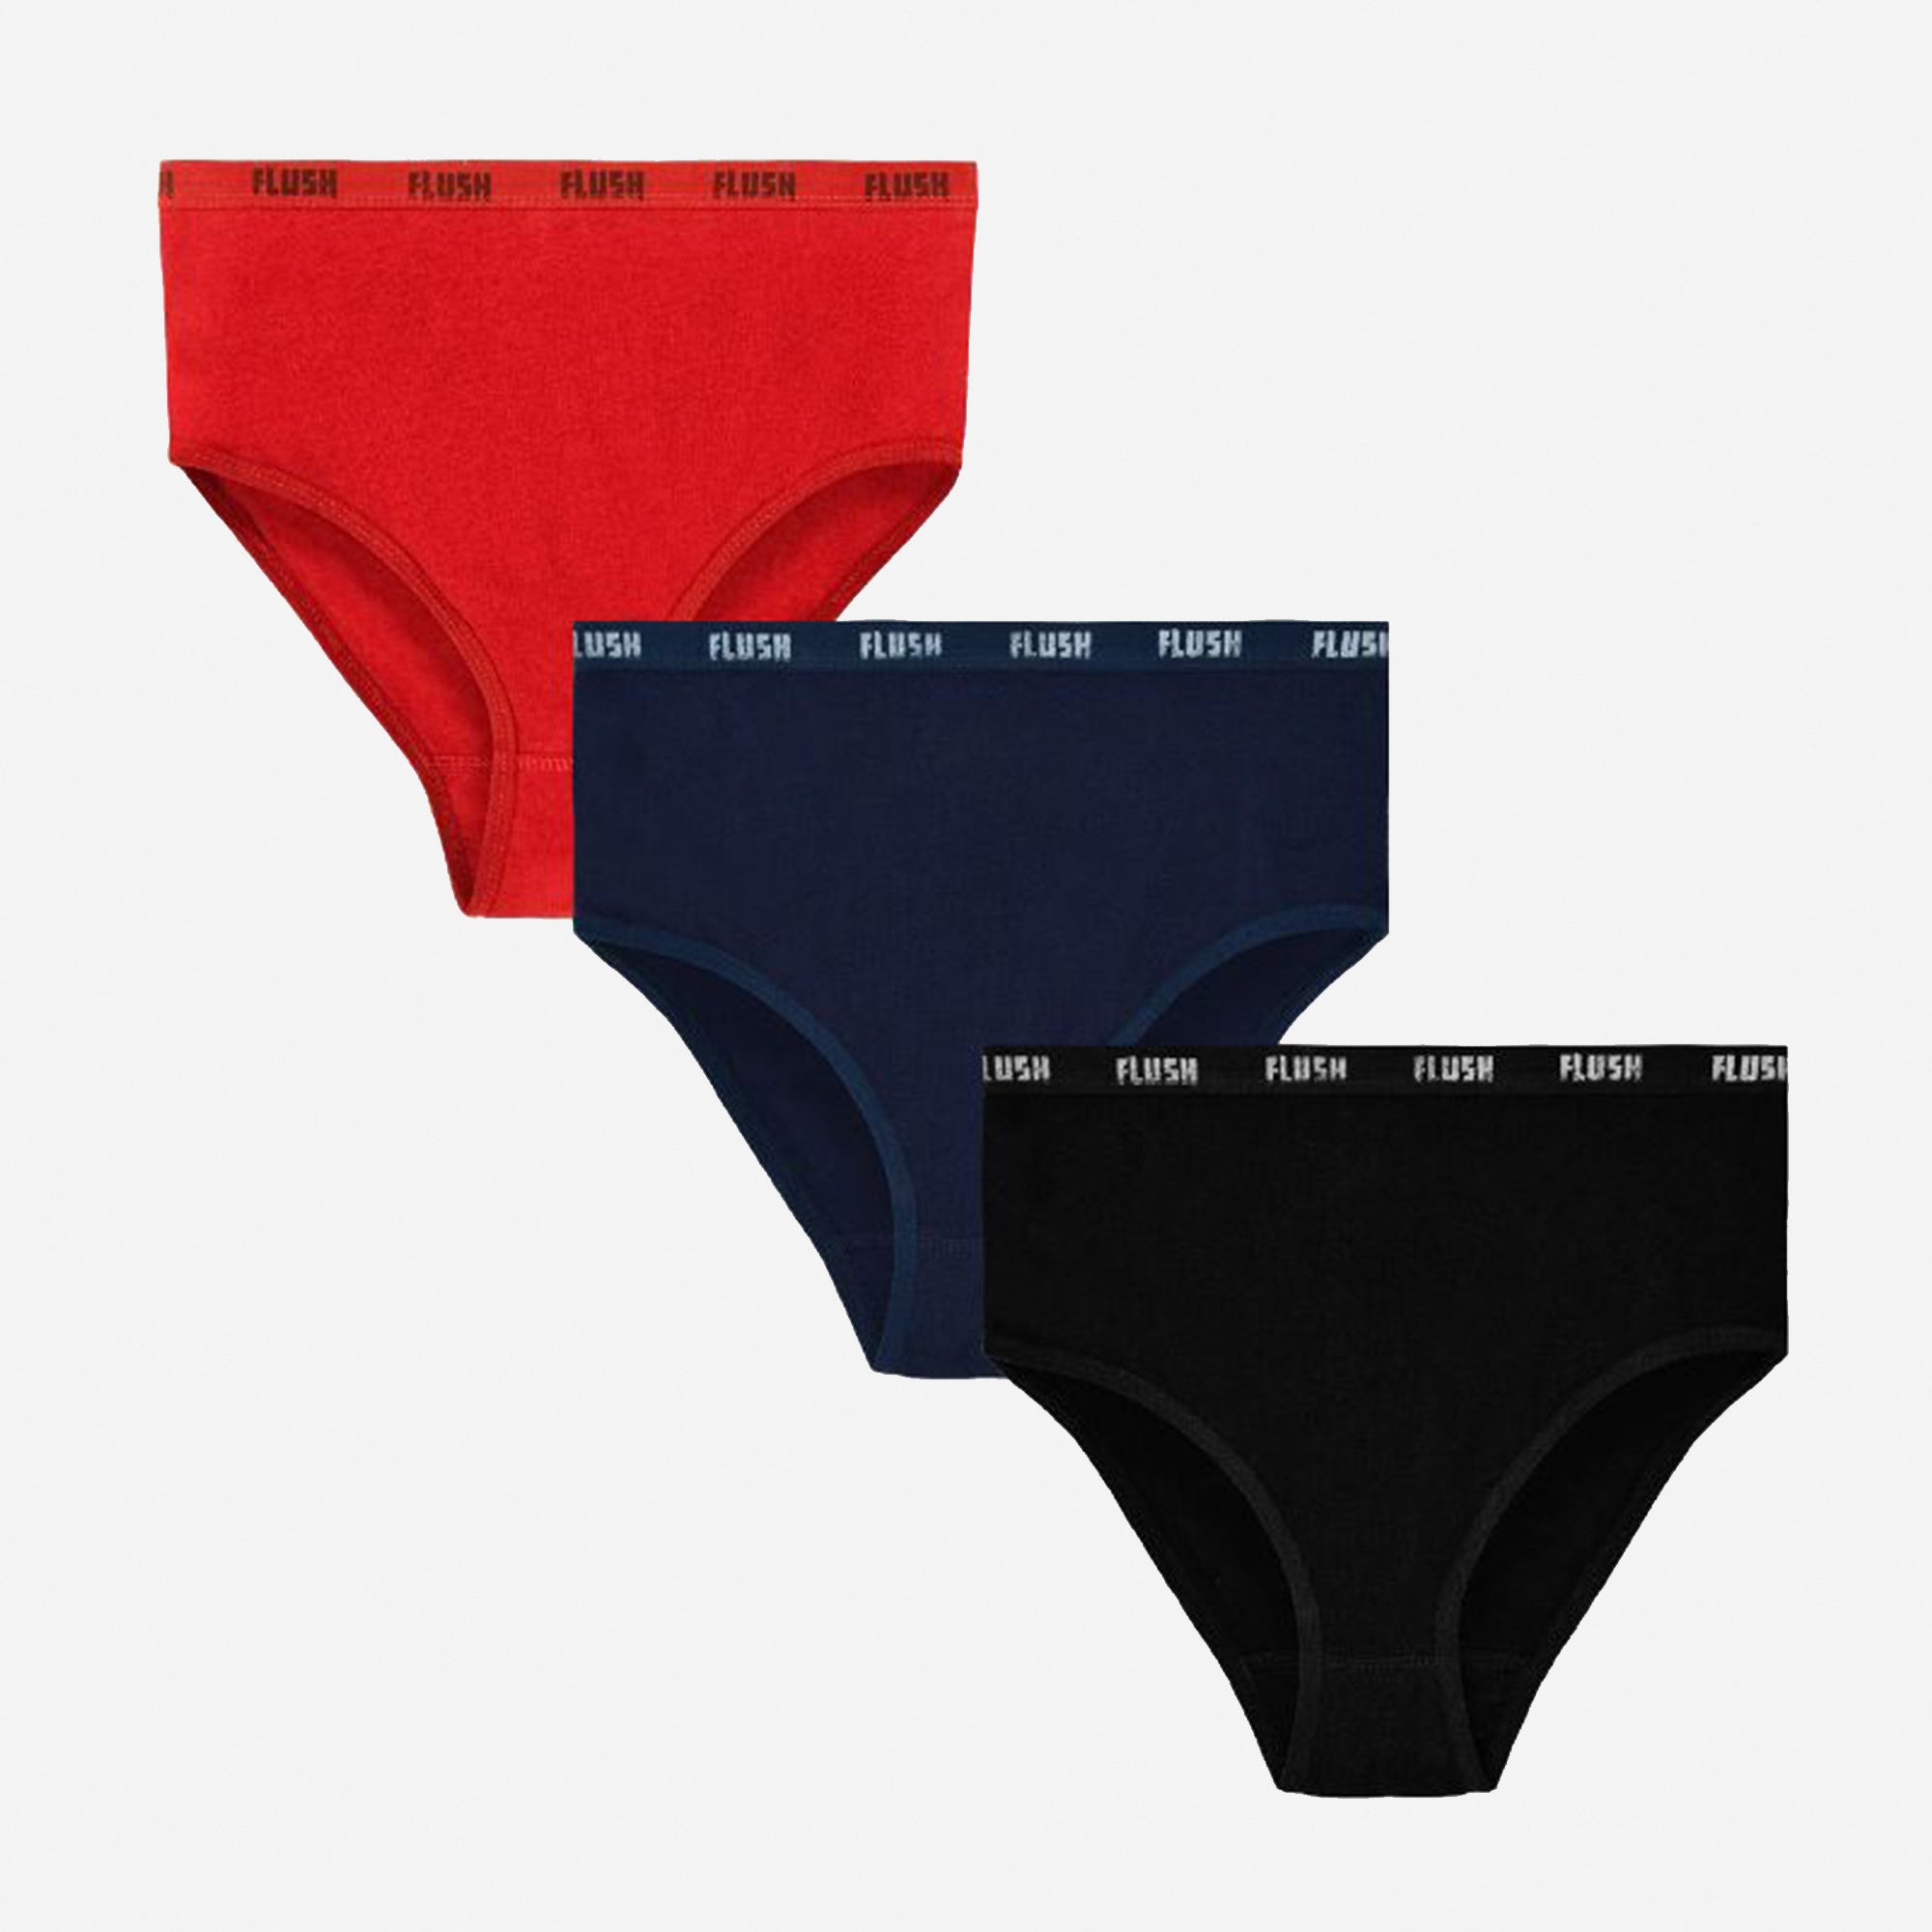 Women's Cotton Underwear Brief Tagless and Breathable - Pack of 3